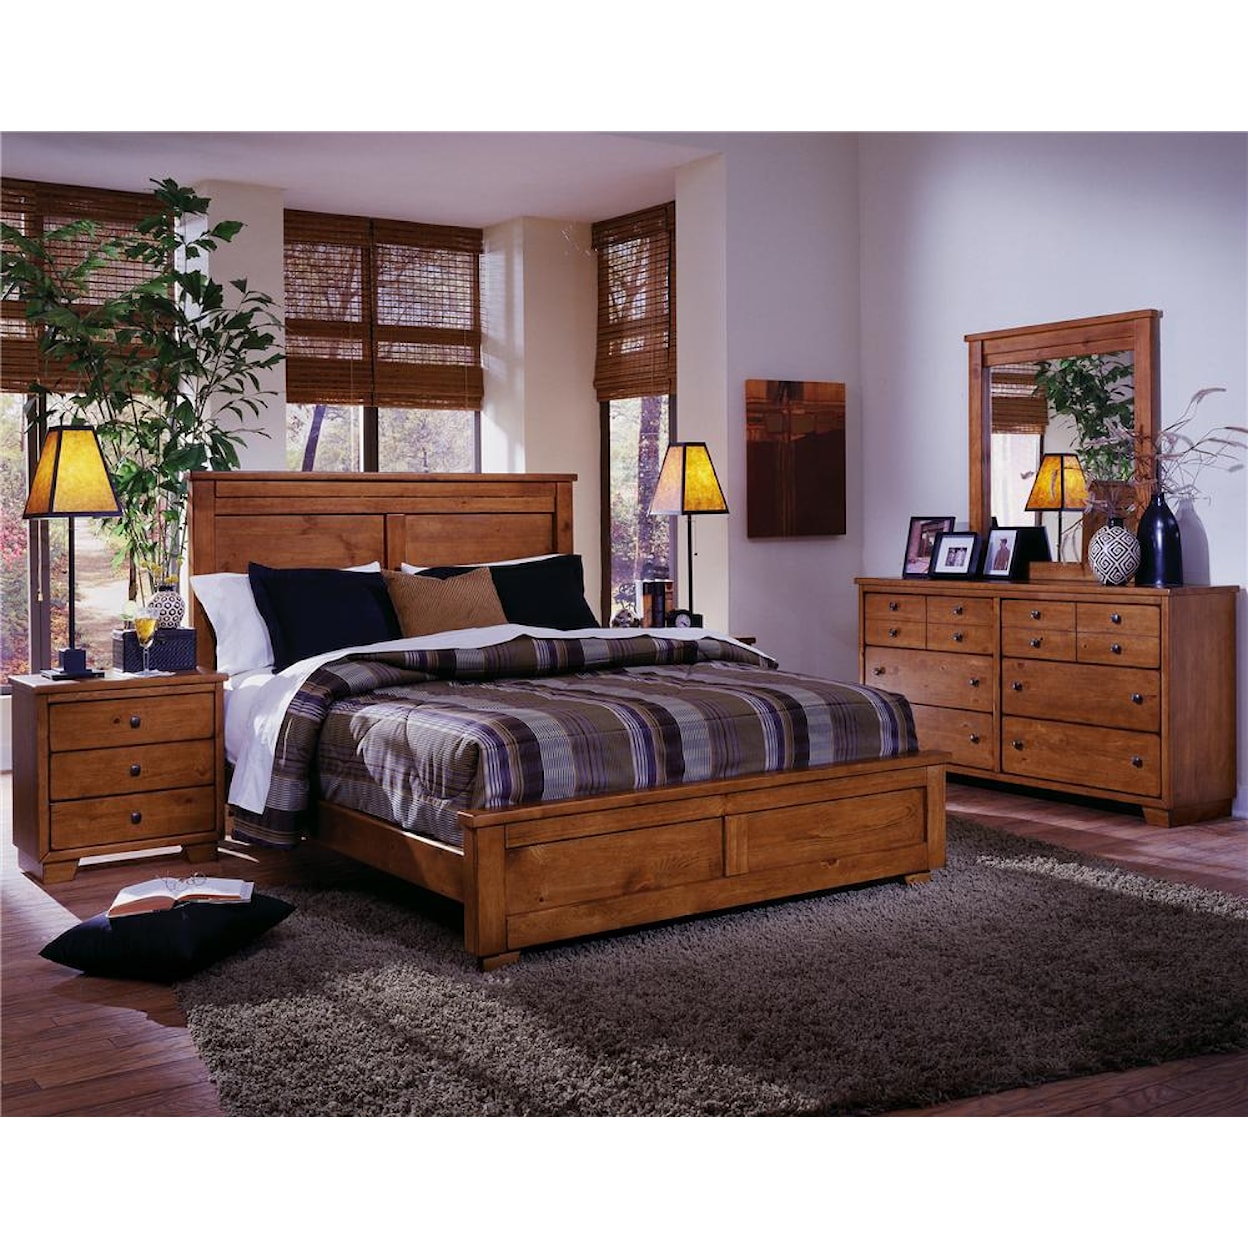 Clearance All Bedroom Furniture in Akron, Cleveland, Canton, Medina,  Youngstown, Ohio, Wayside Furniture & Mattress